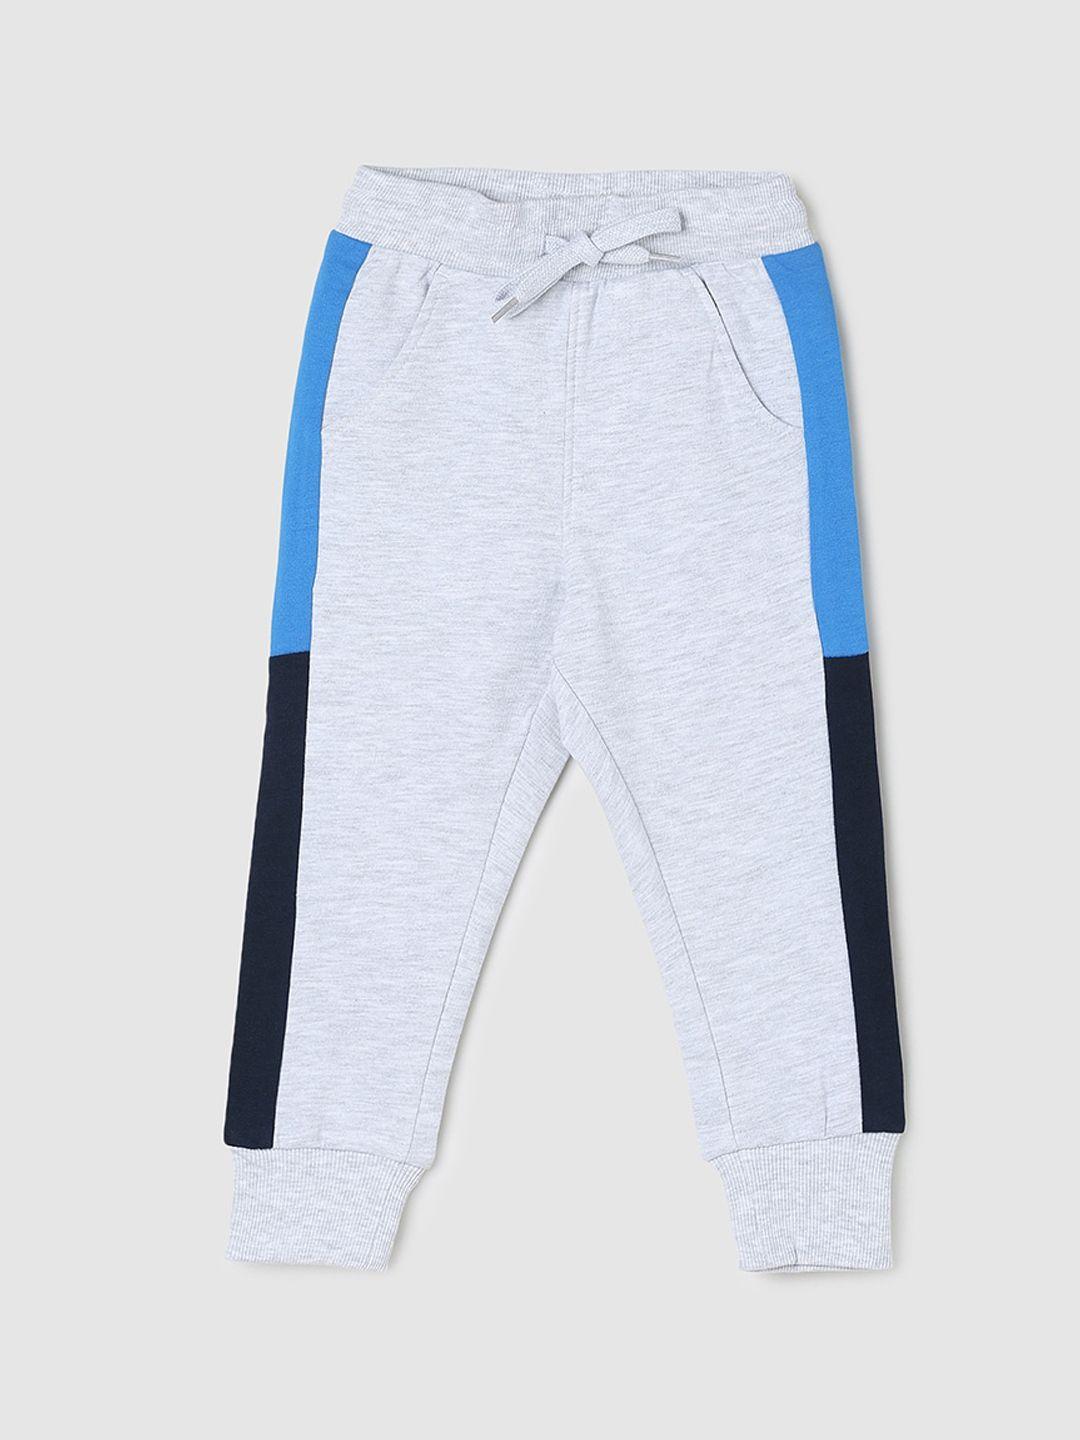 max boys colorblocked detail joggers